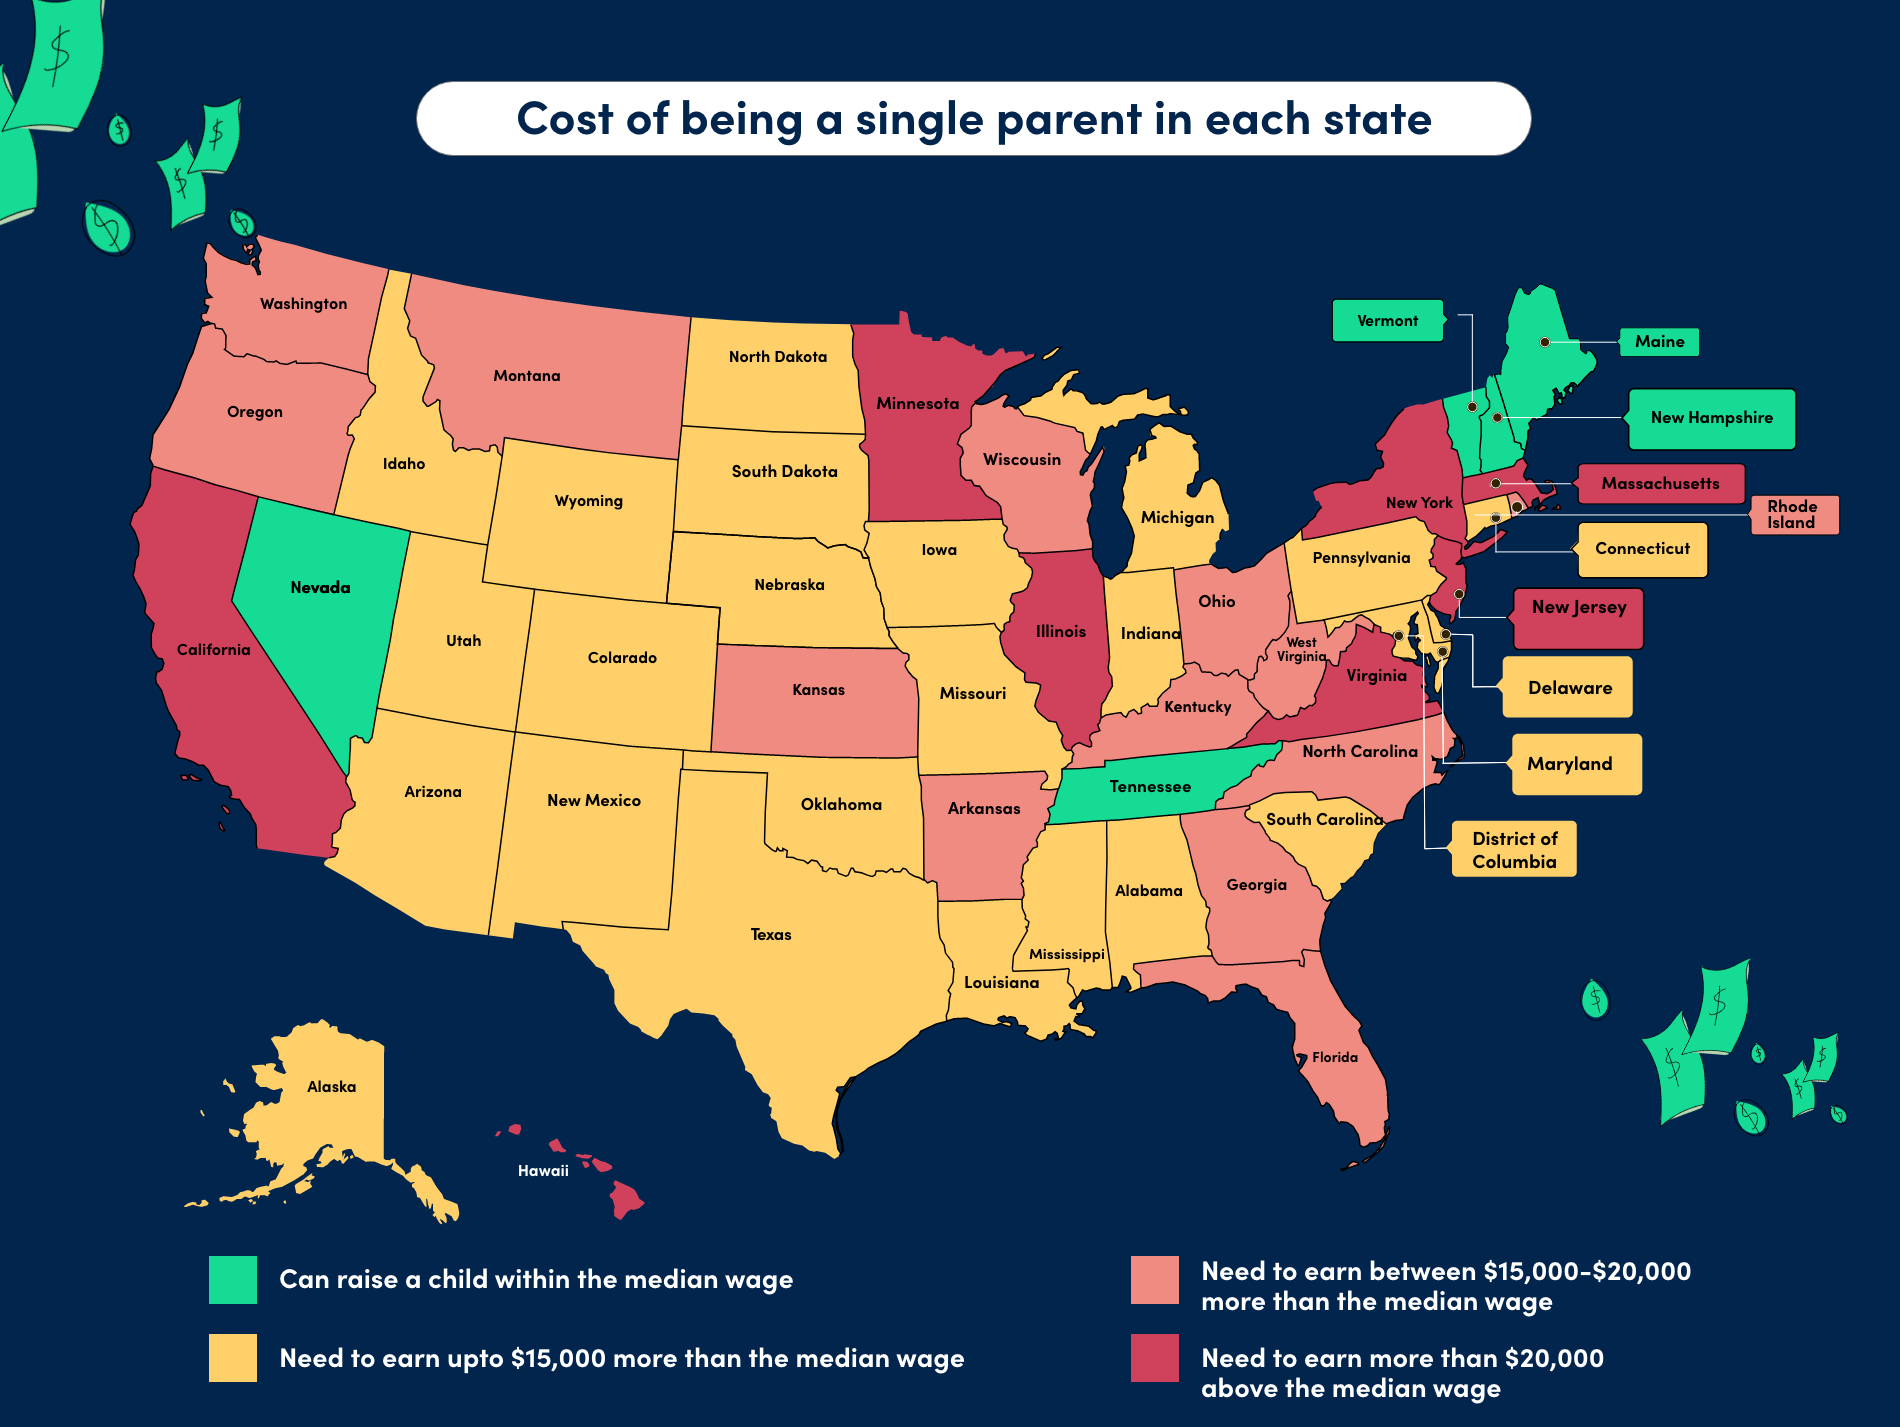 Cost of being a single parent in each state